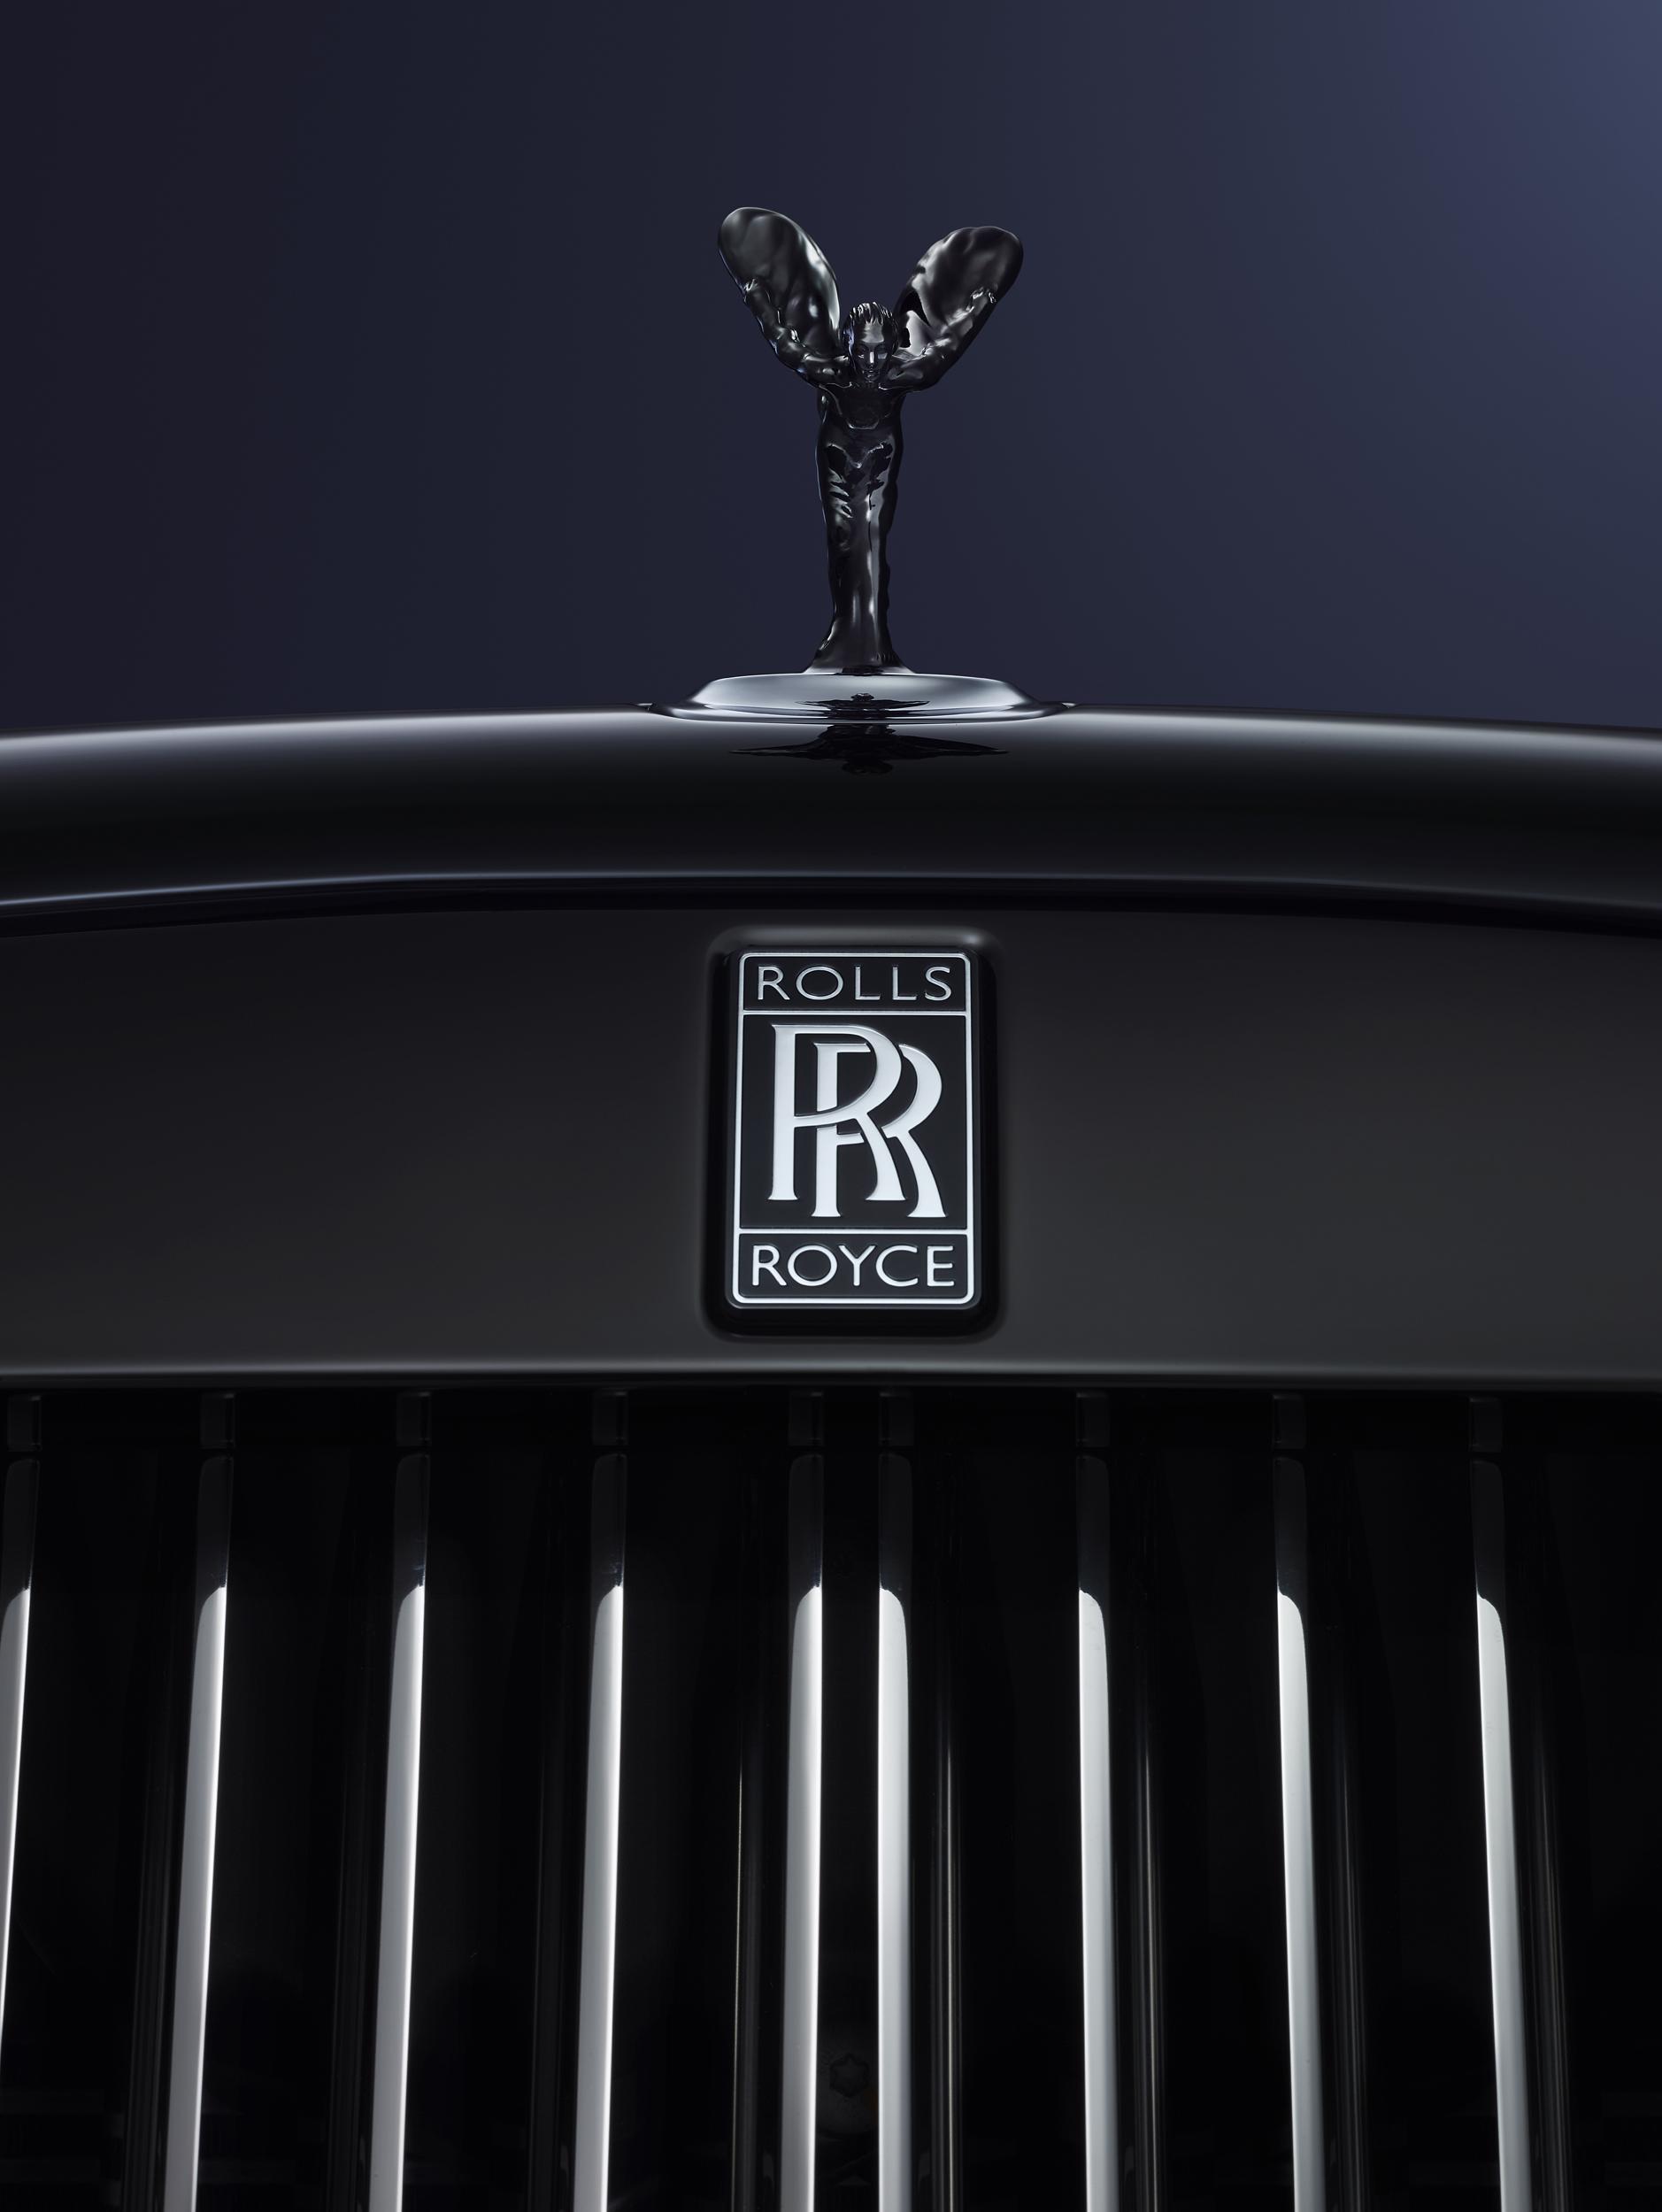 Black Badge A Dark Edgy Lifestyle Statement From Rolls Royce